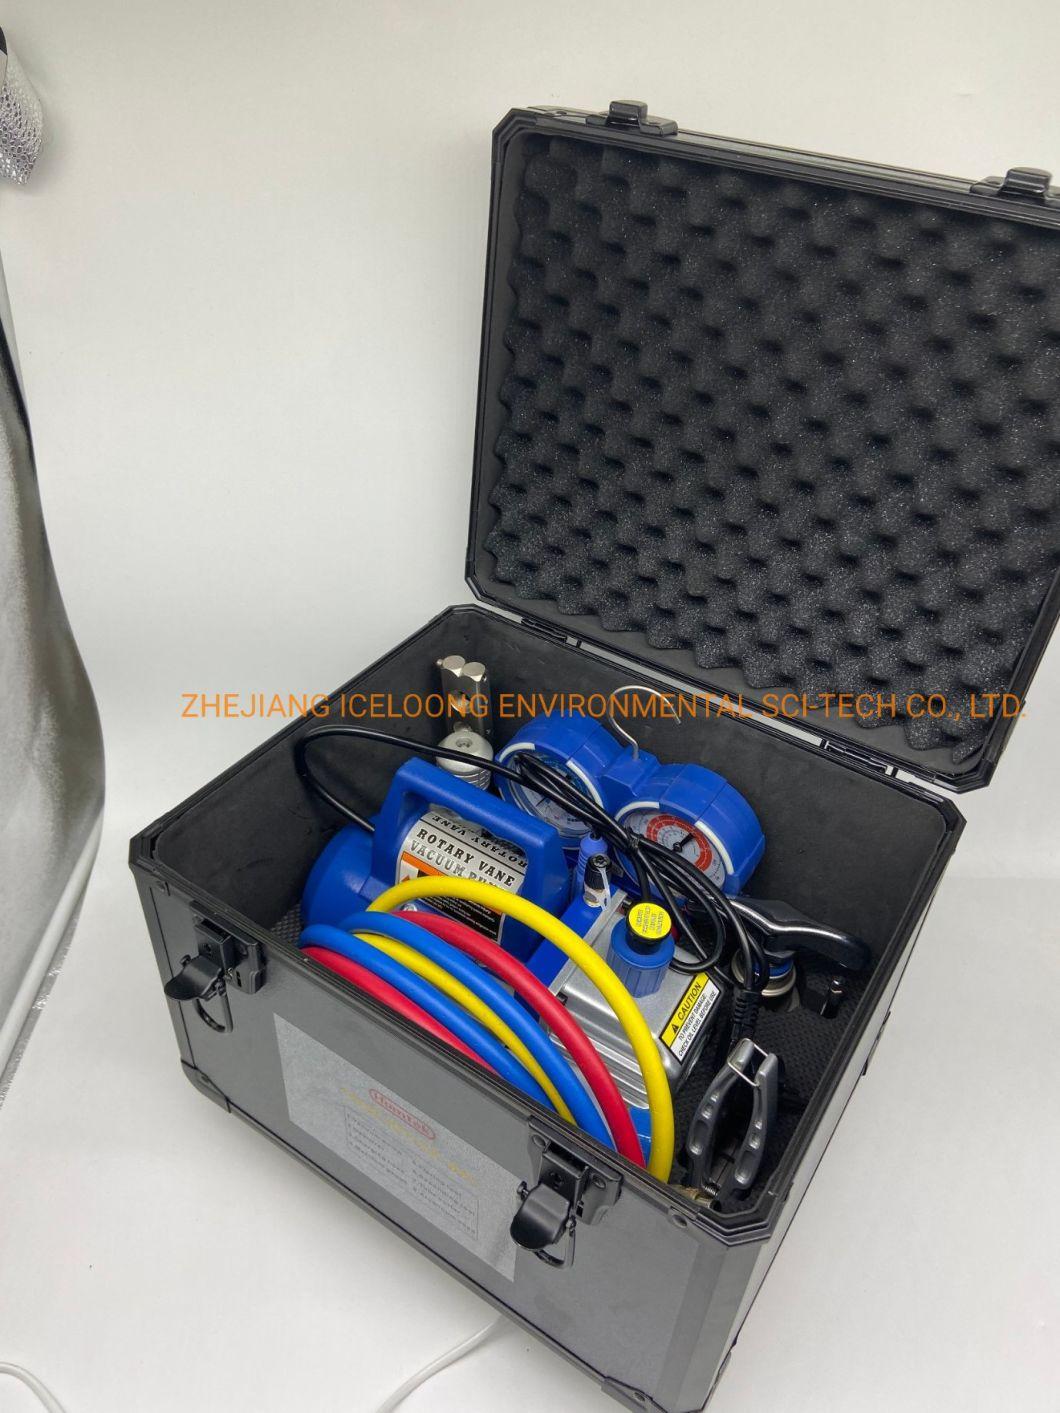 Service Tube Tools Kit for Refrigeration